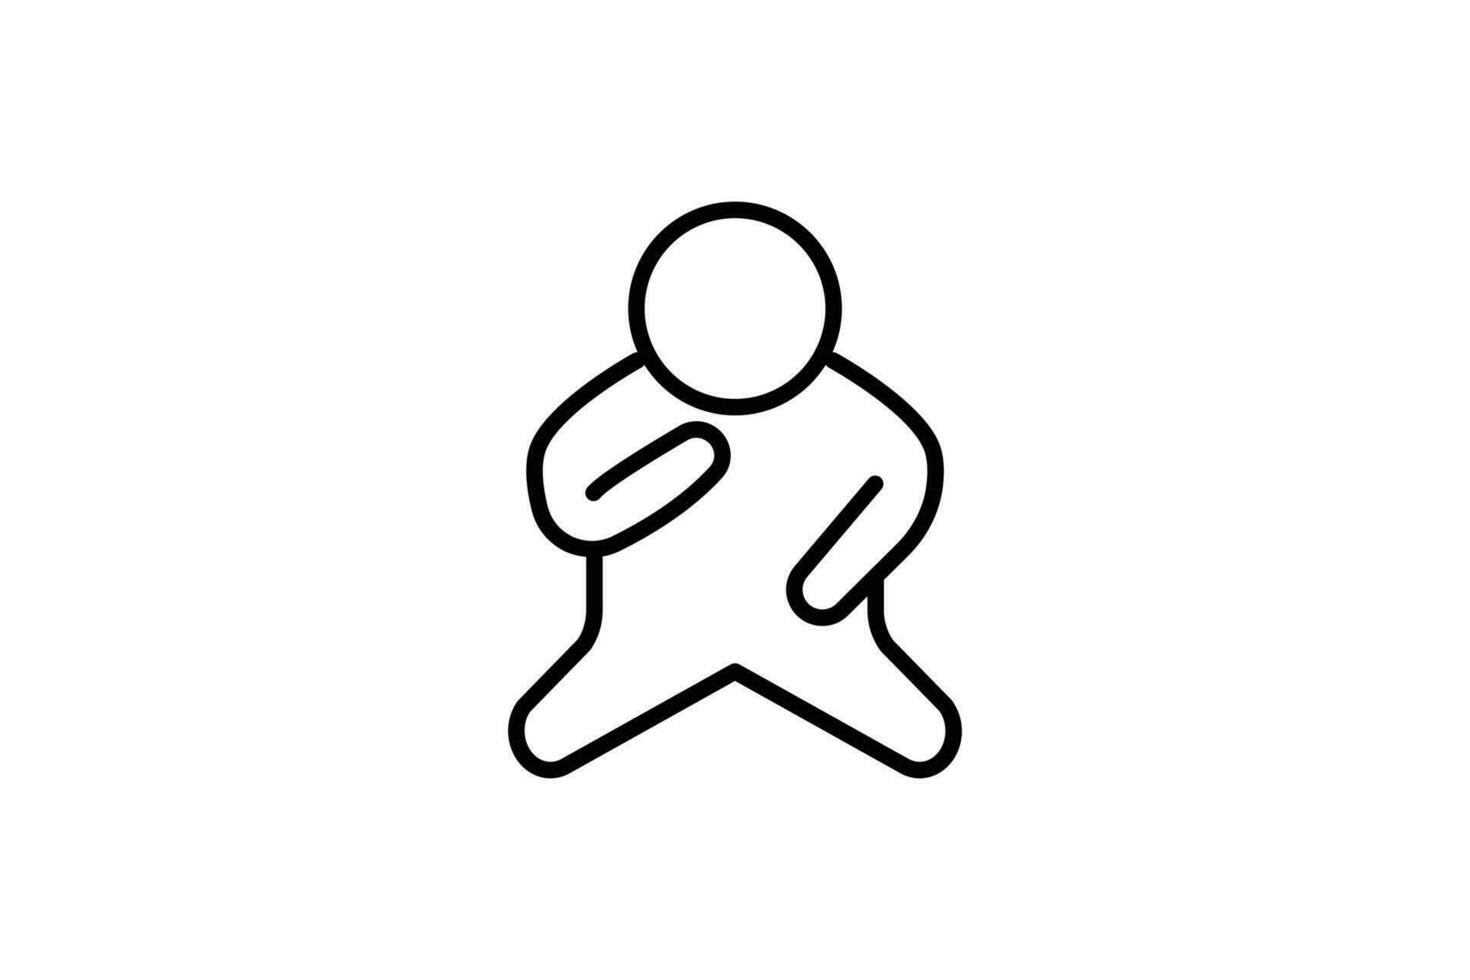 Contemplation icon. Icon related to critical thinking. icon suitable for web site design, app, user interfaces, printable etc. Line icon style. Simple vector design editable